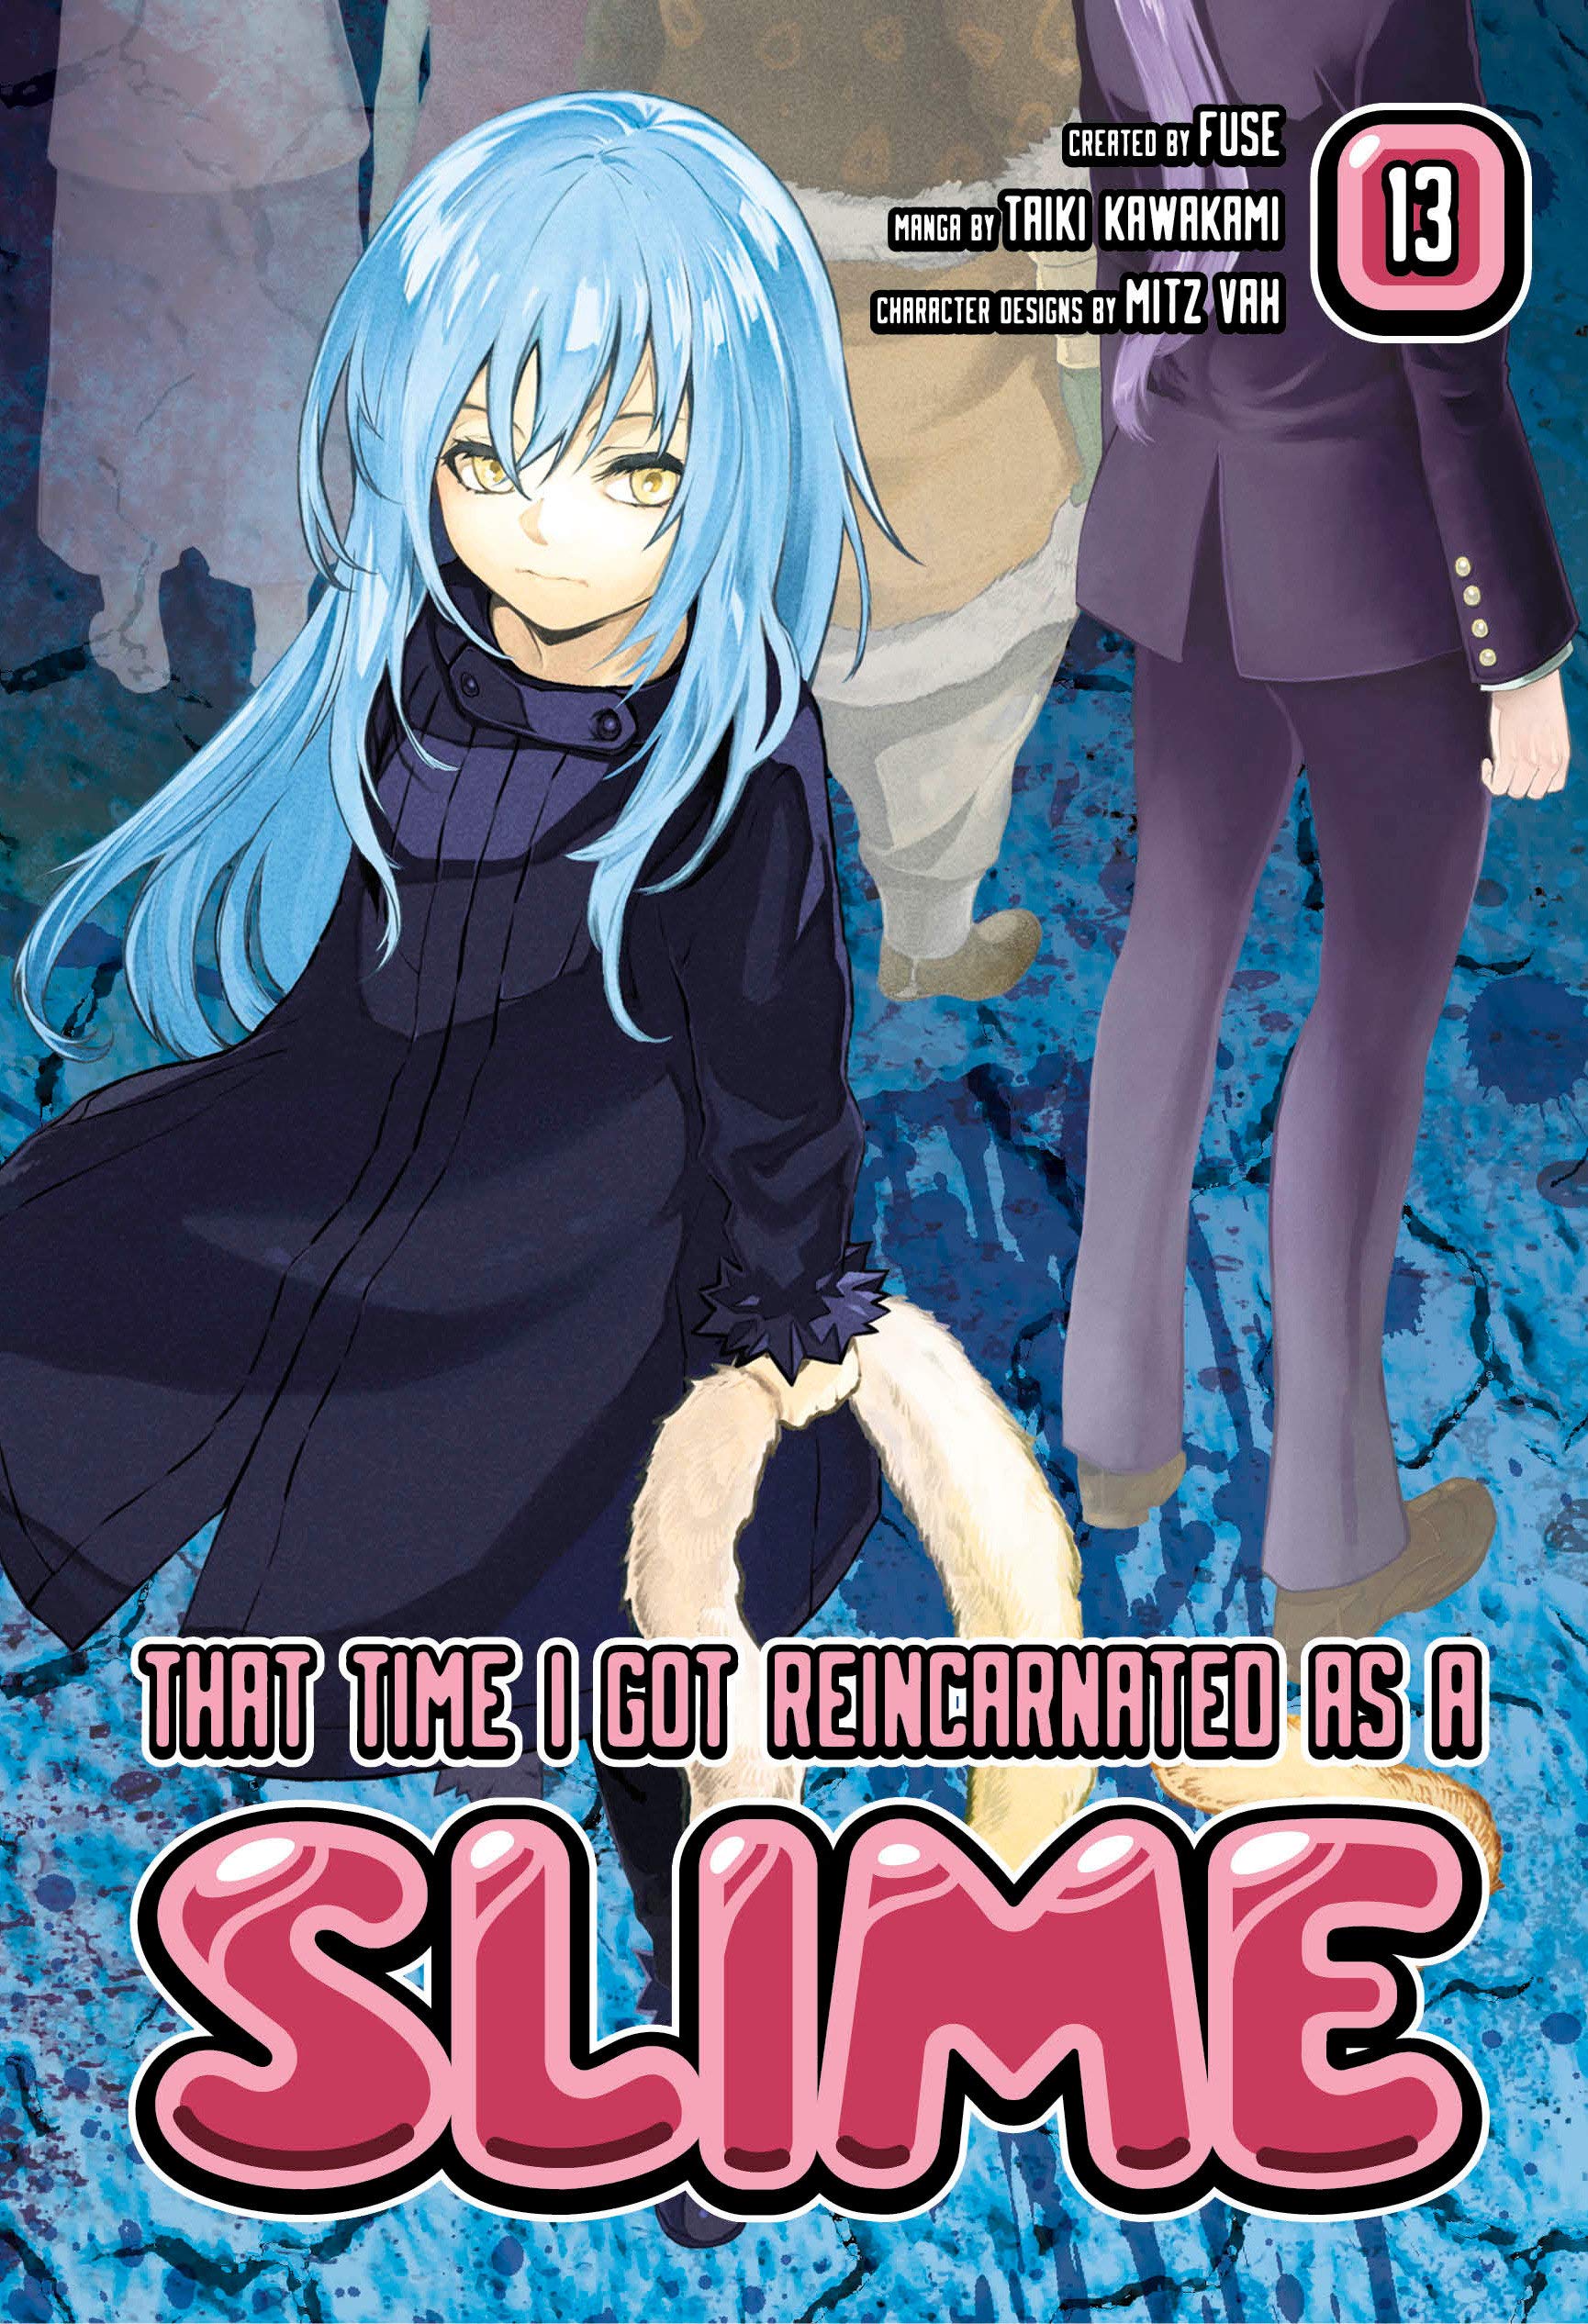 That Time I Got Reincarnated as a Slime 13 | Fuse